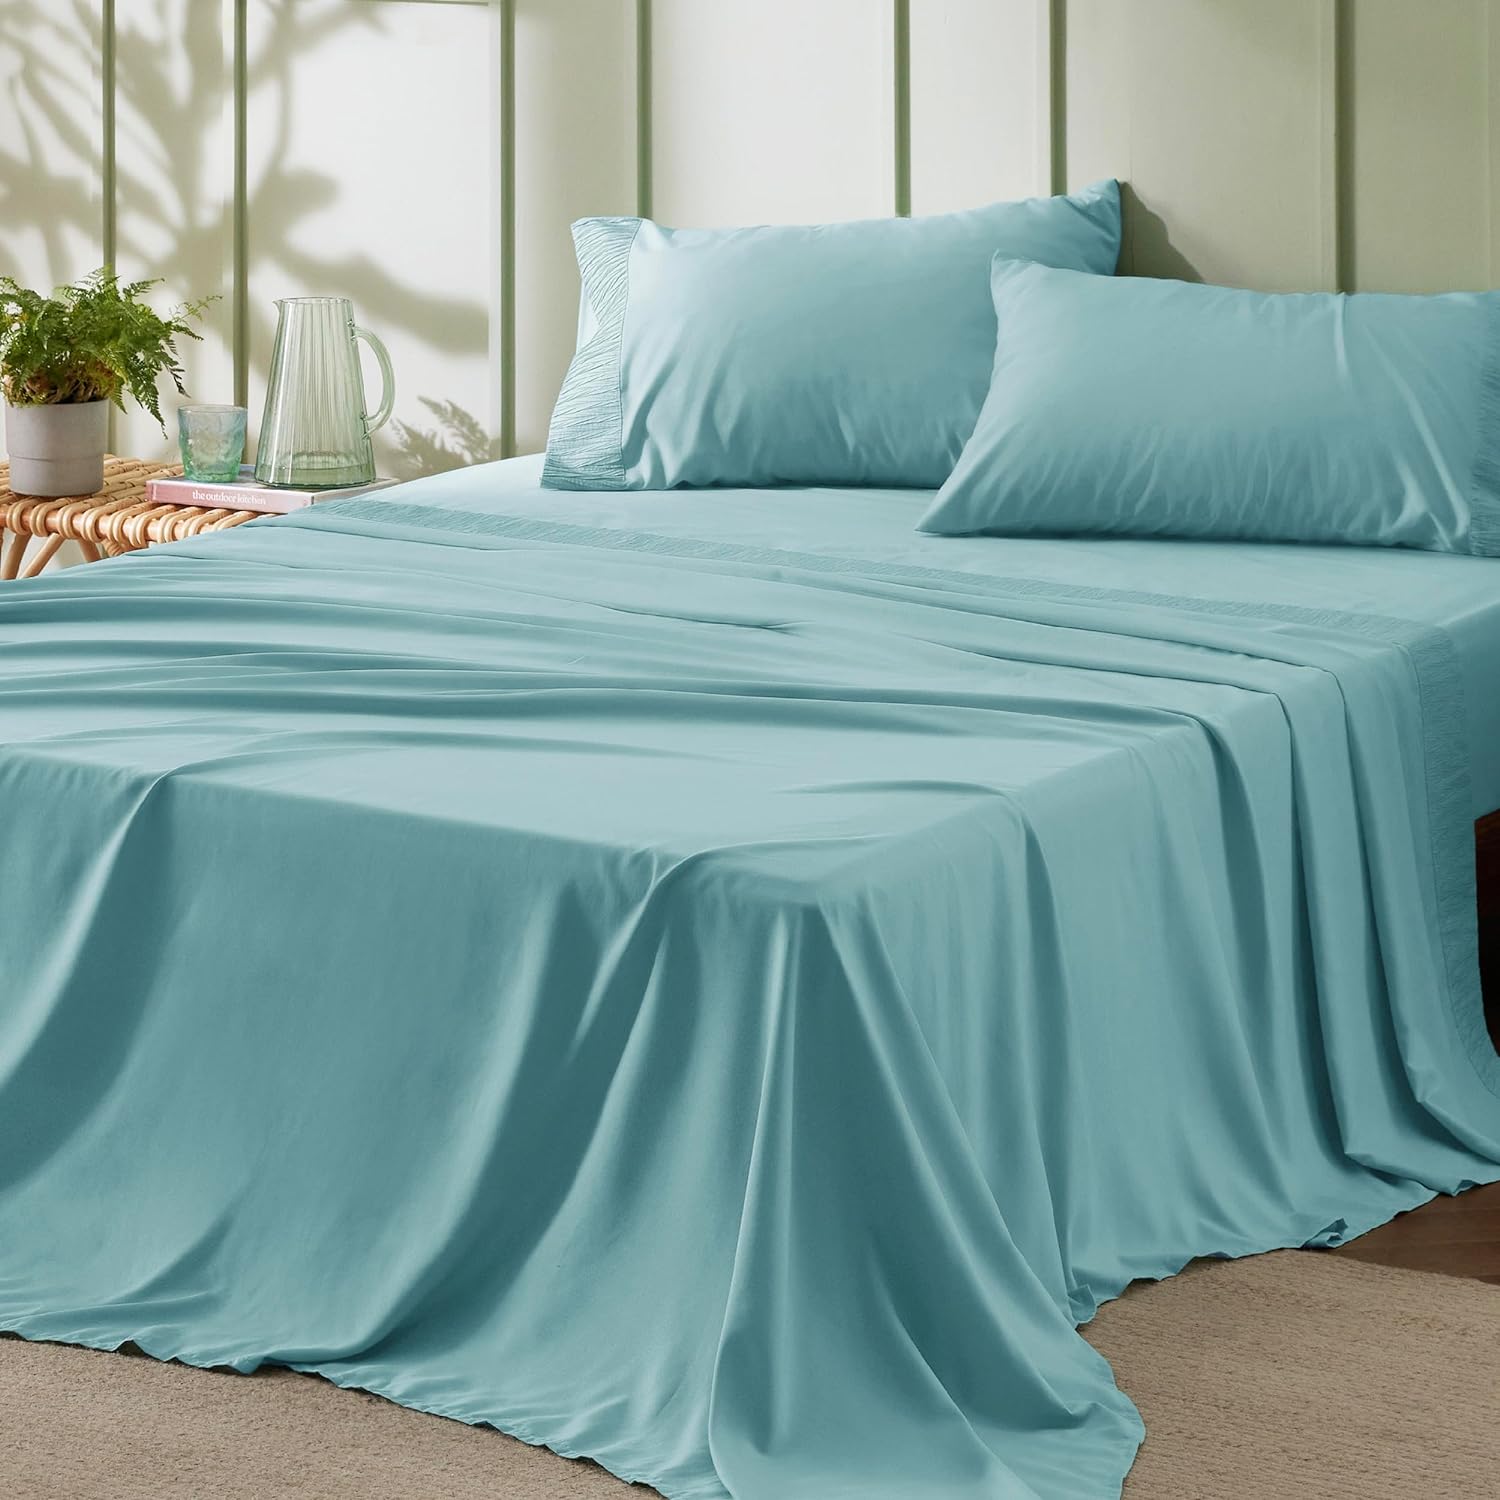 Bedsure Queen Sheet Set - Soft Sheets for Queen Size Bed, 4 Pieces Hotel Luxury Spa Blue Queen Sheets, Easy Care Polyester Microfiber Cooling Bed Sheet Set